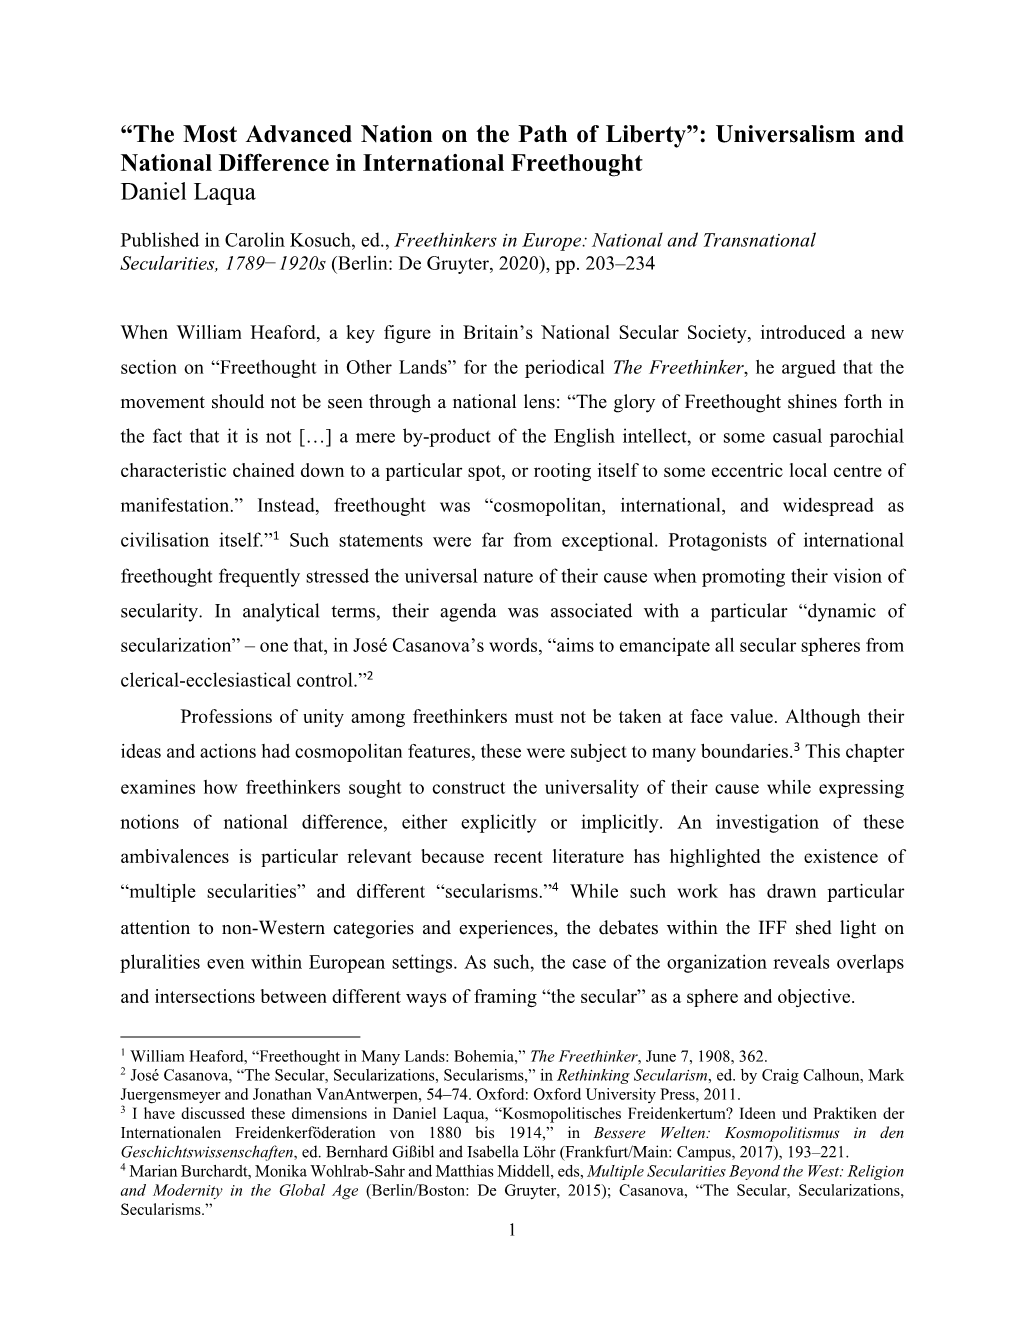 Universalism and National Difference in International Freethought Daniel Laqua